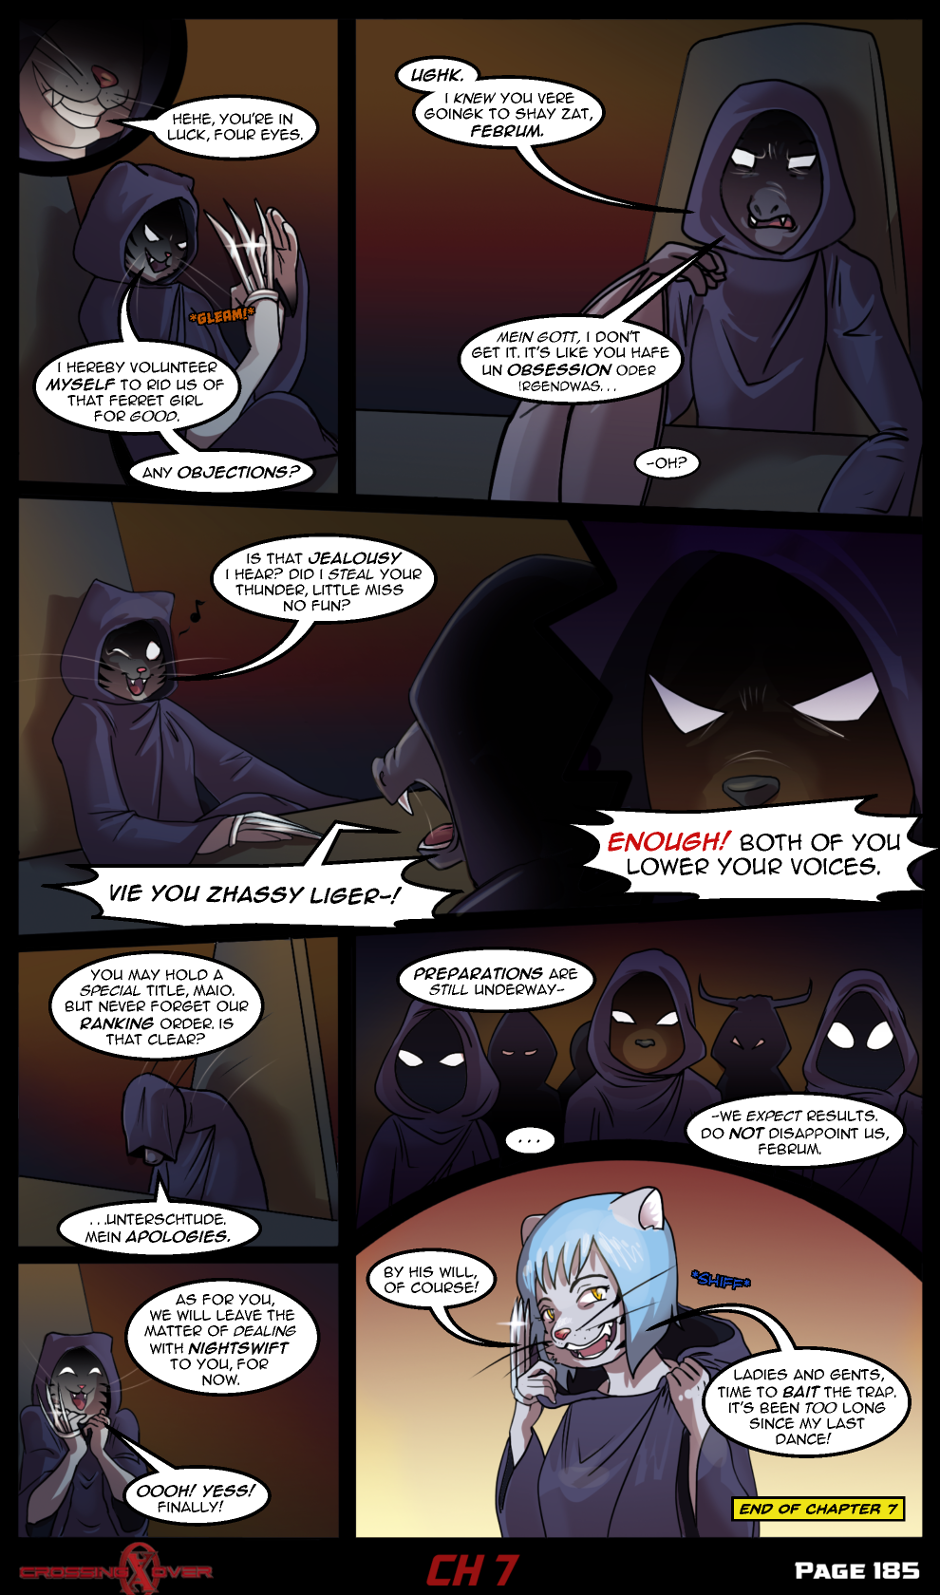 Page 185 (Ch 7)